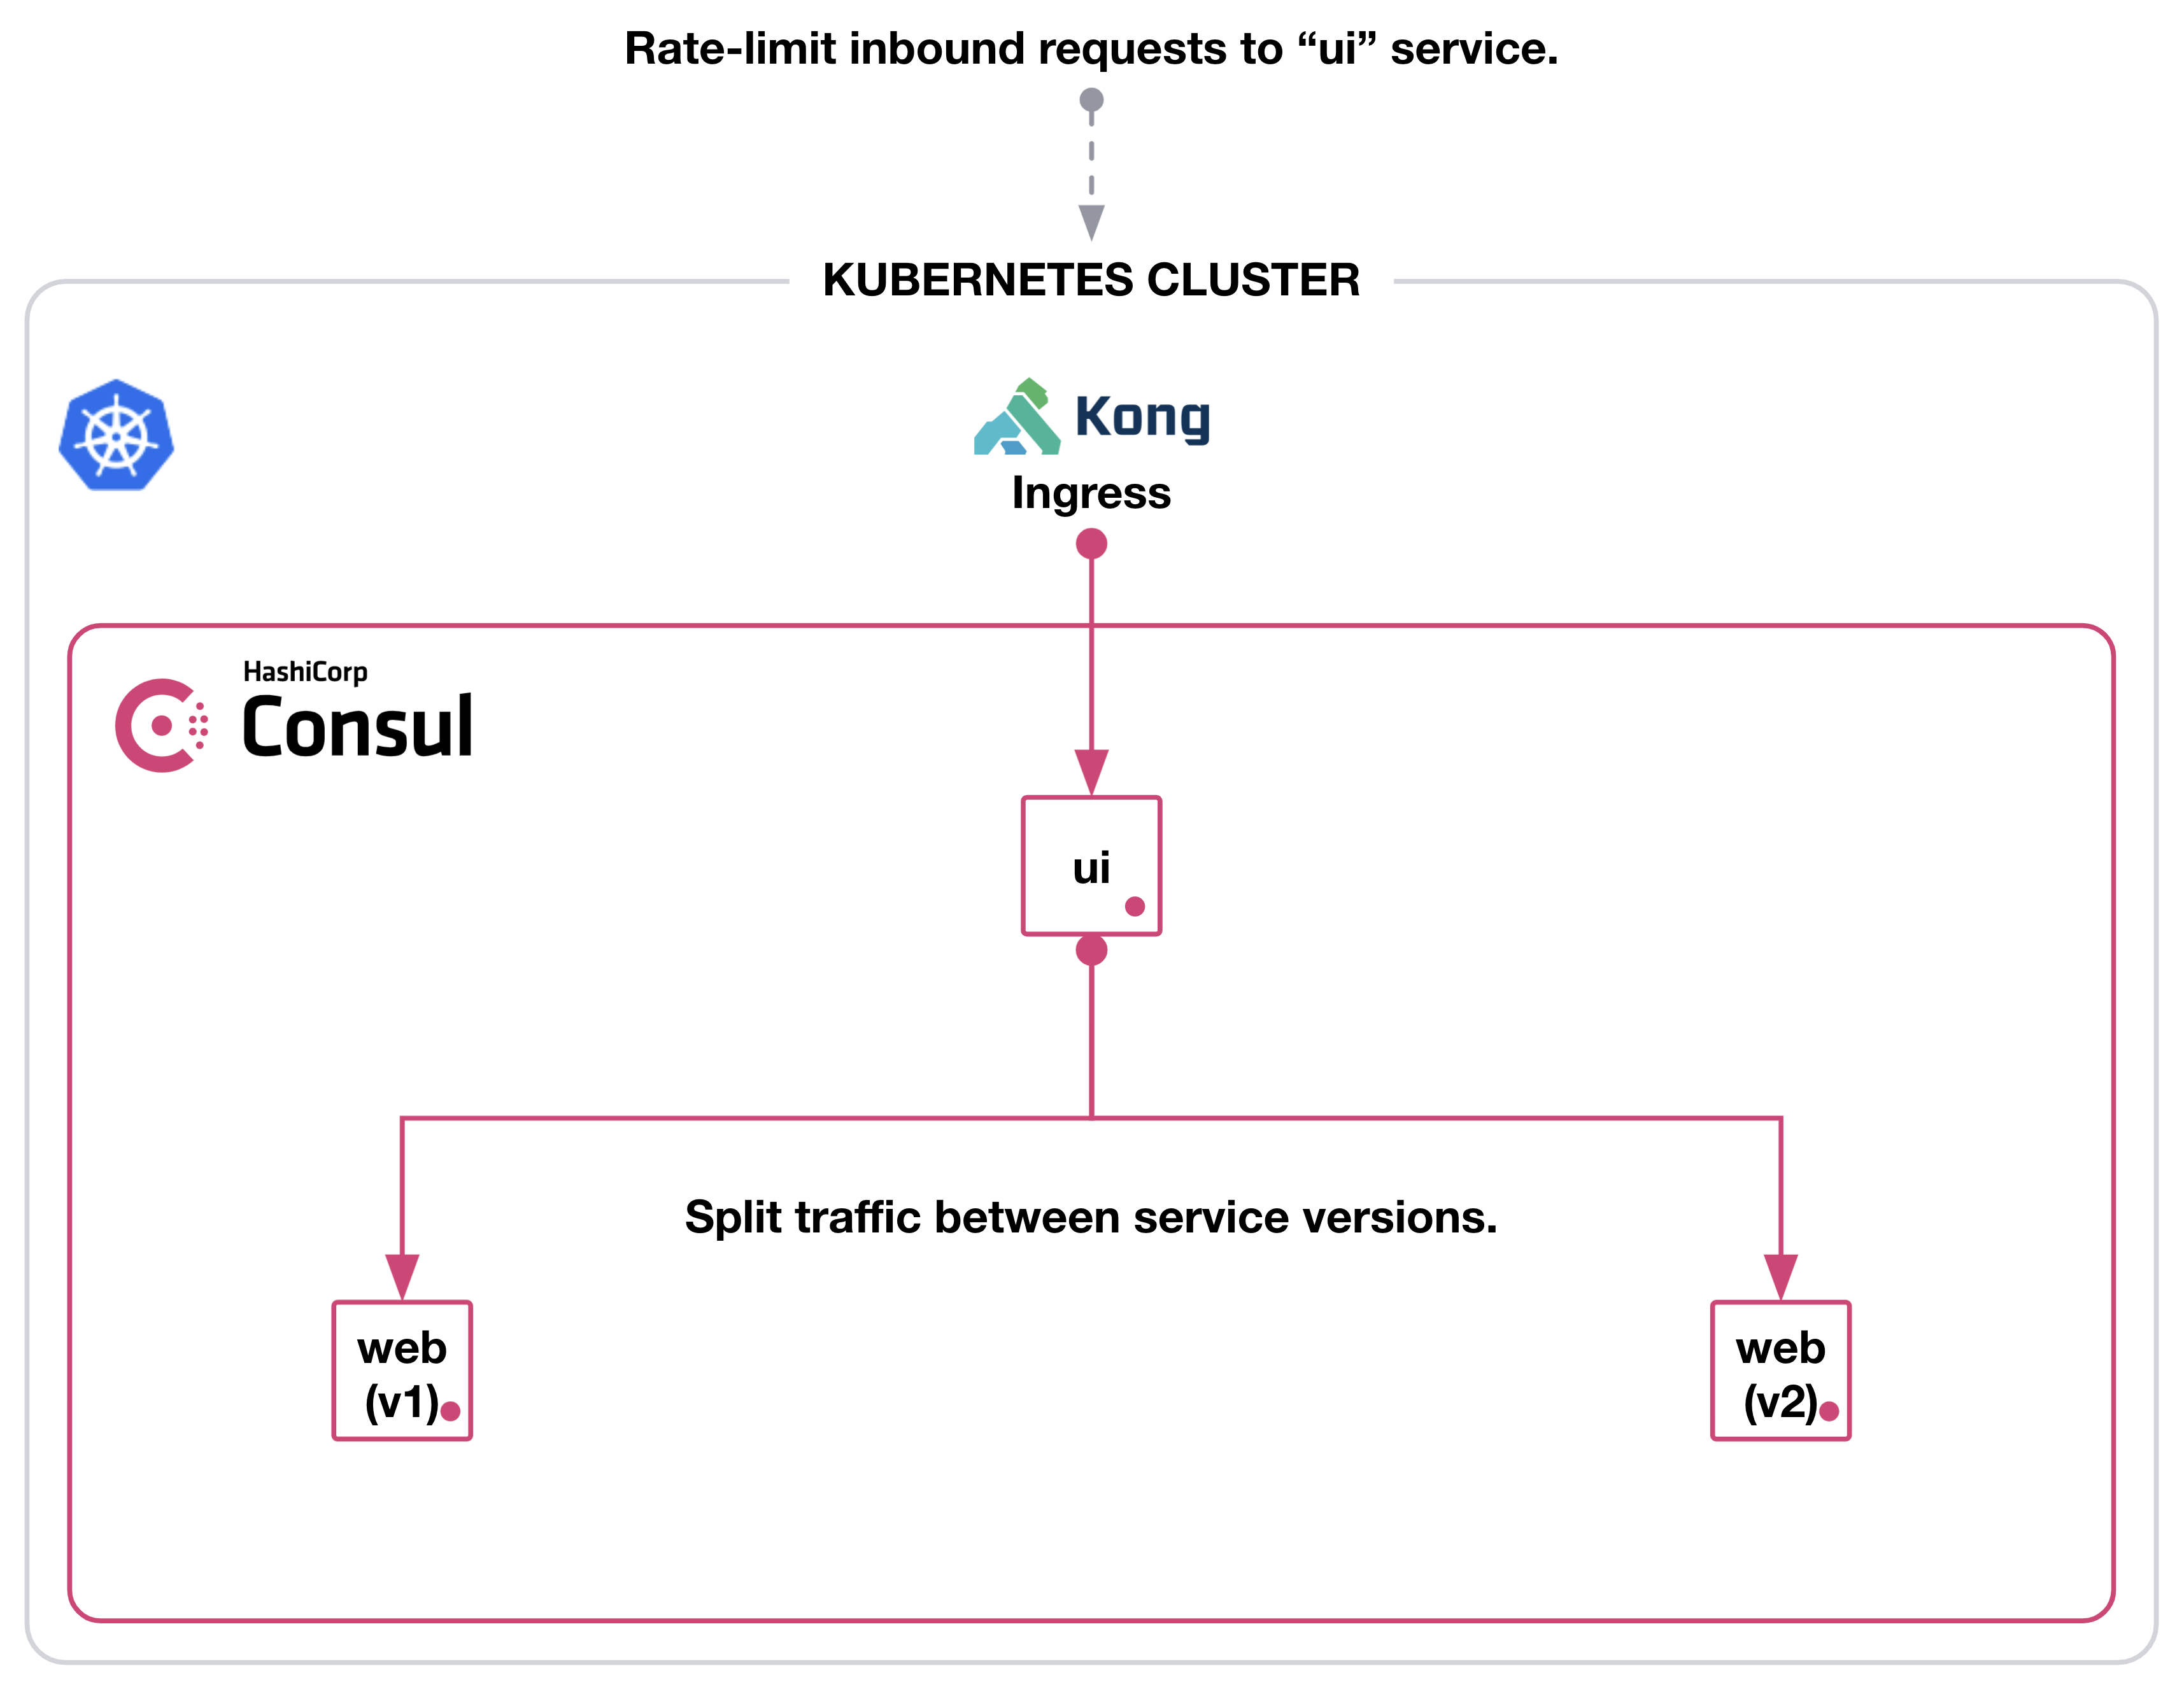 Architecture diagram of Kong ingress rate-limiting inbound requests to `ui` and Consul service mesh splitting traffic between two versions of web in a Kubernetes cluster.